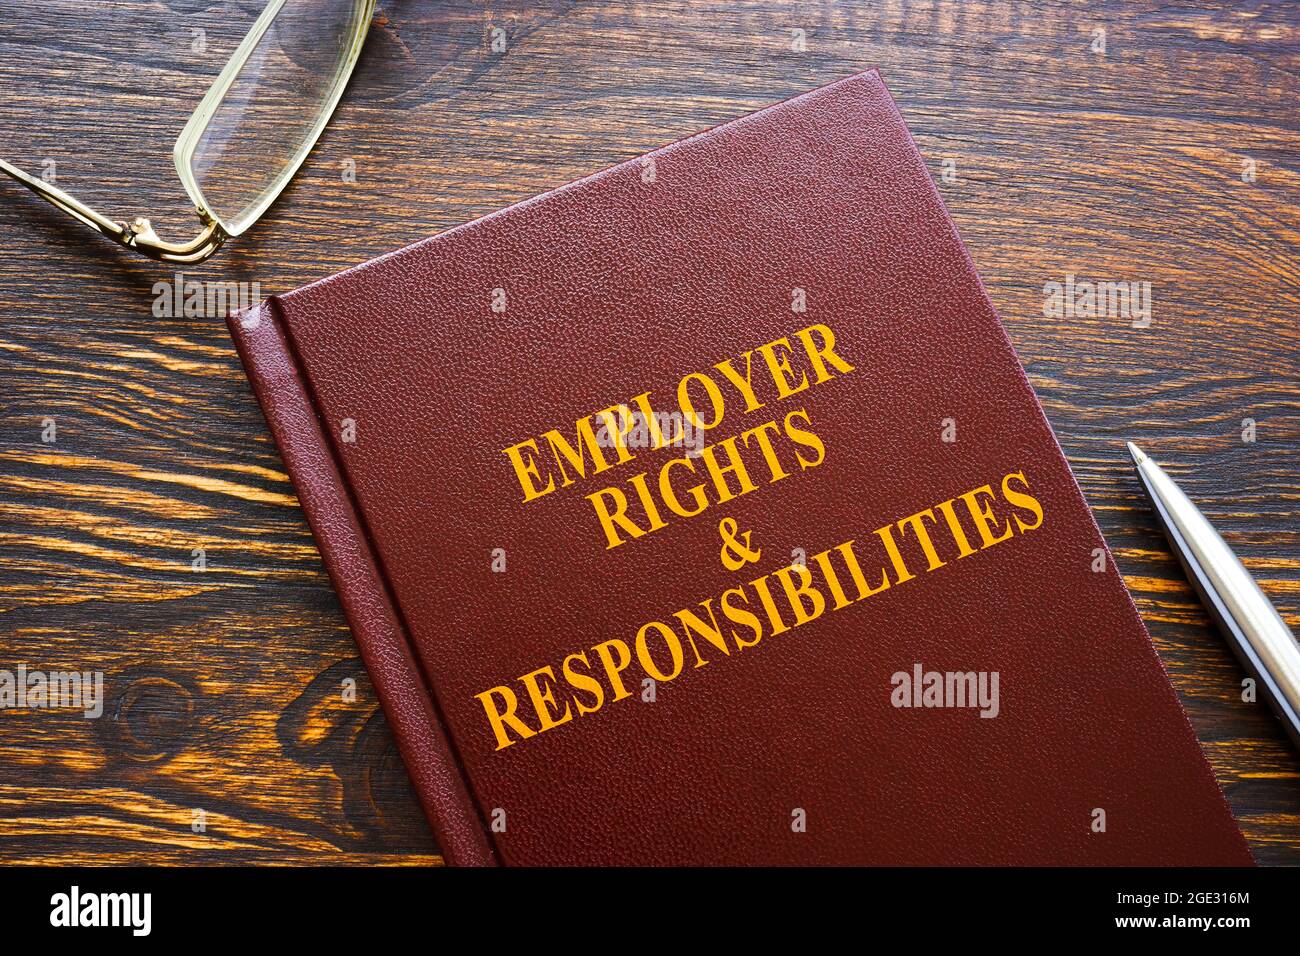 Employer Rights and Responsibilities book and glasses. Stock Photo